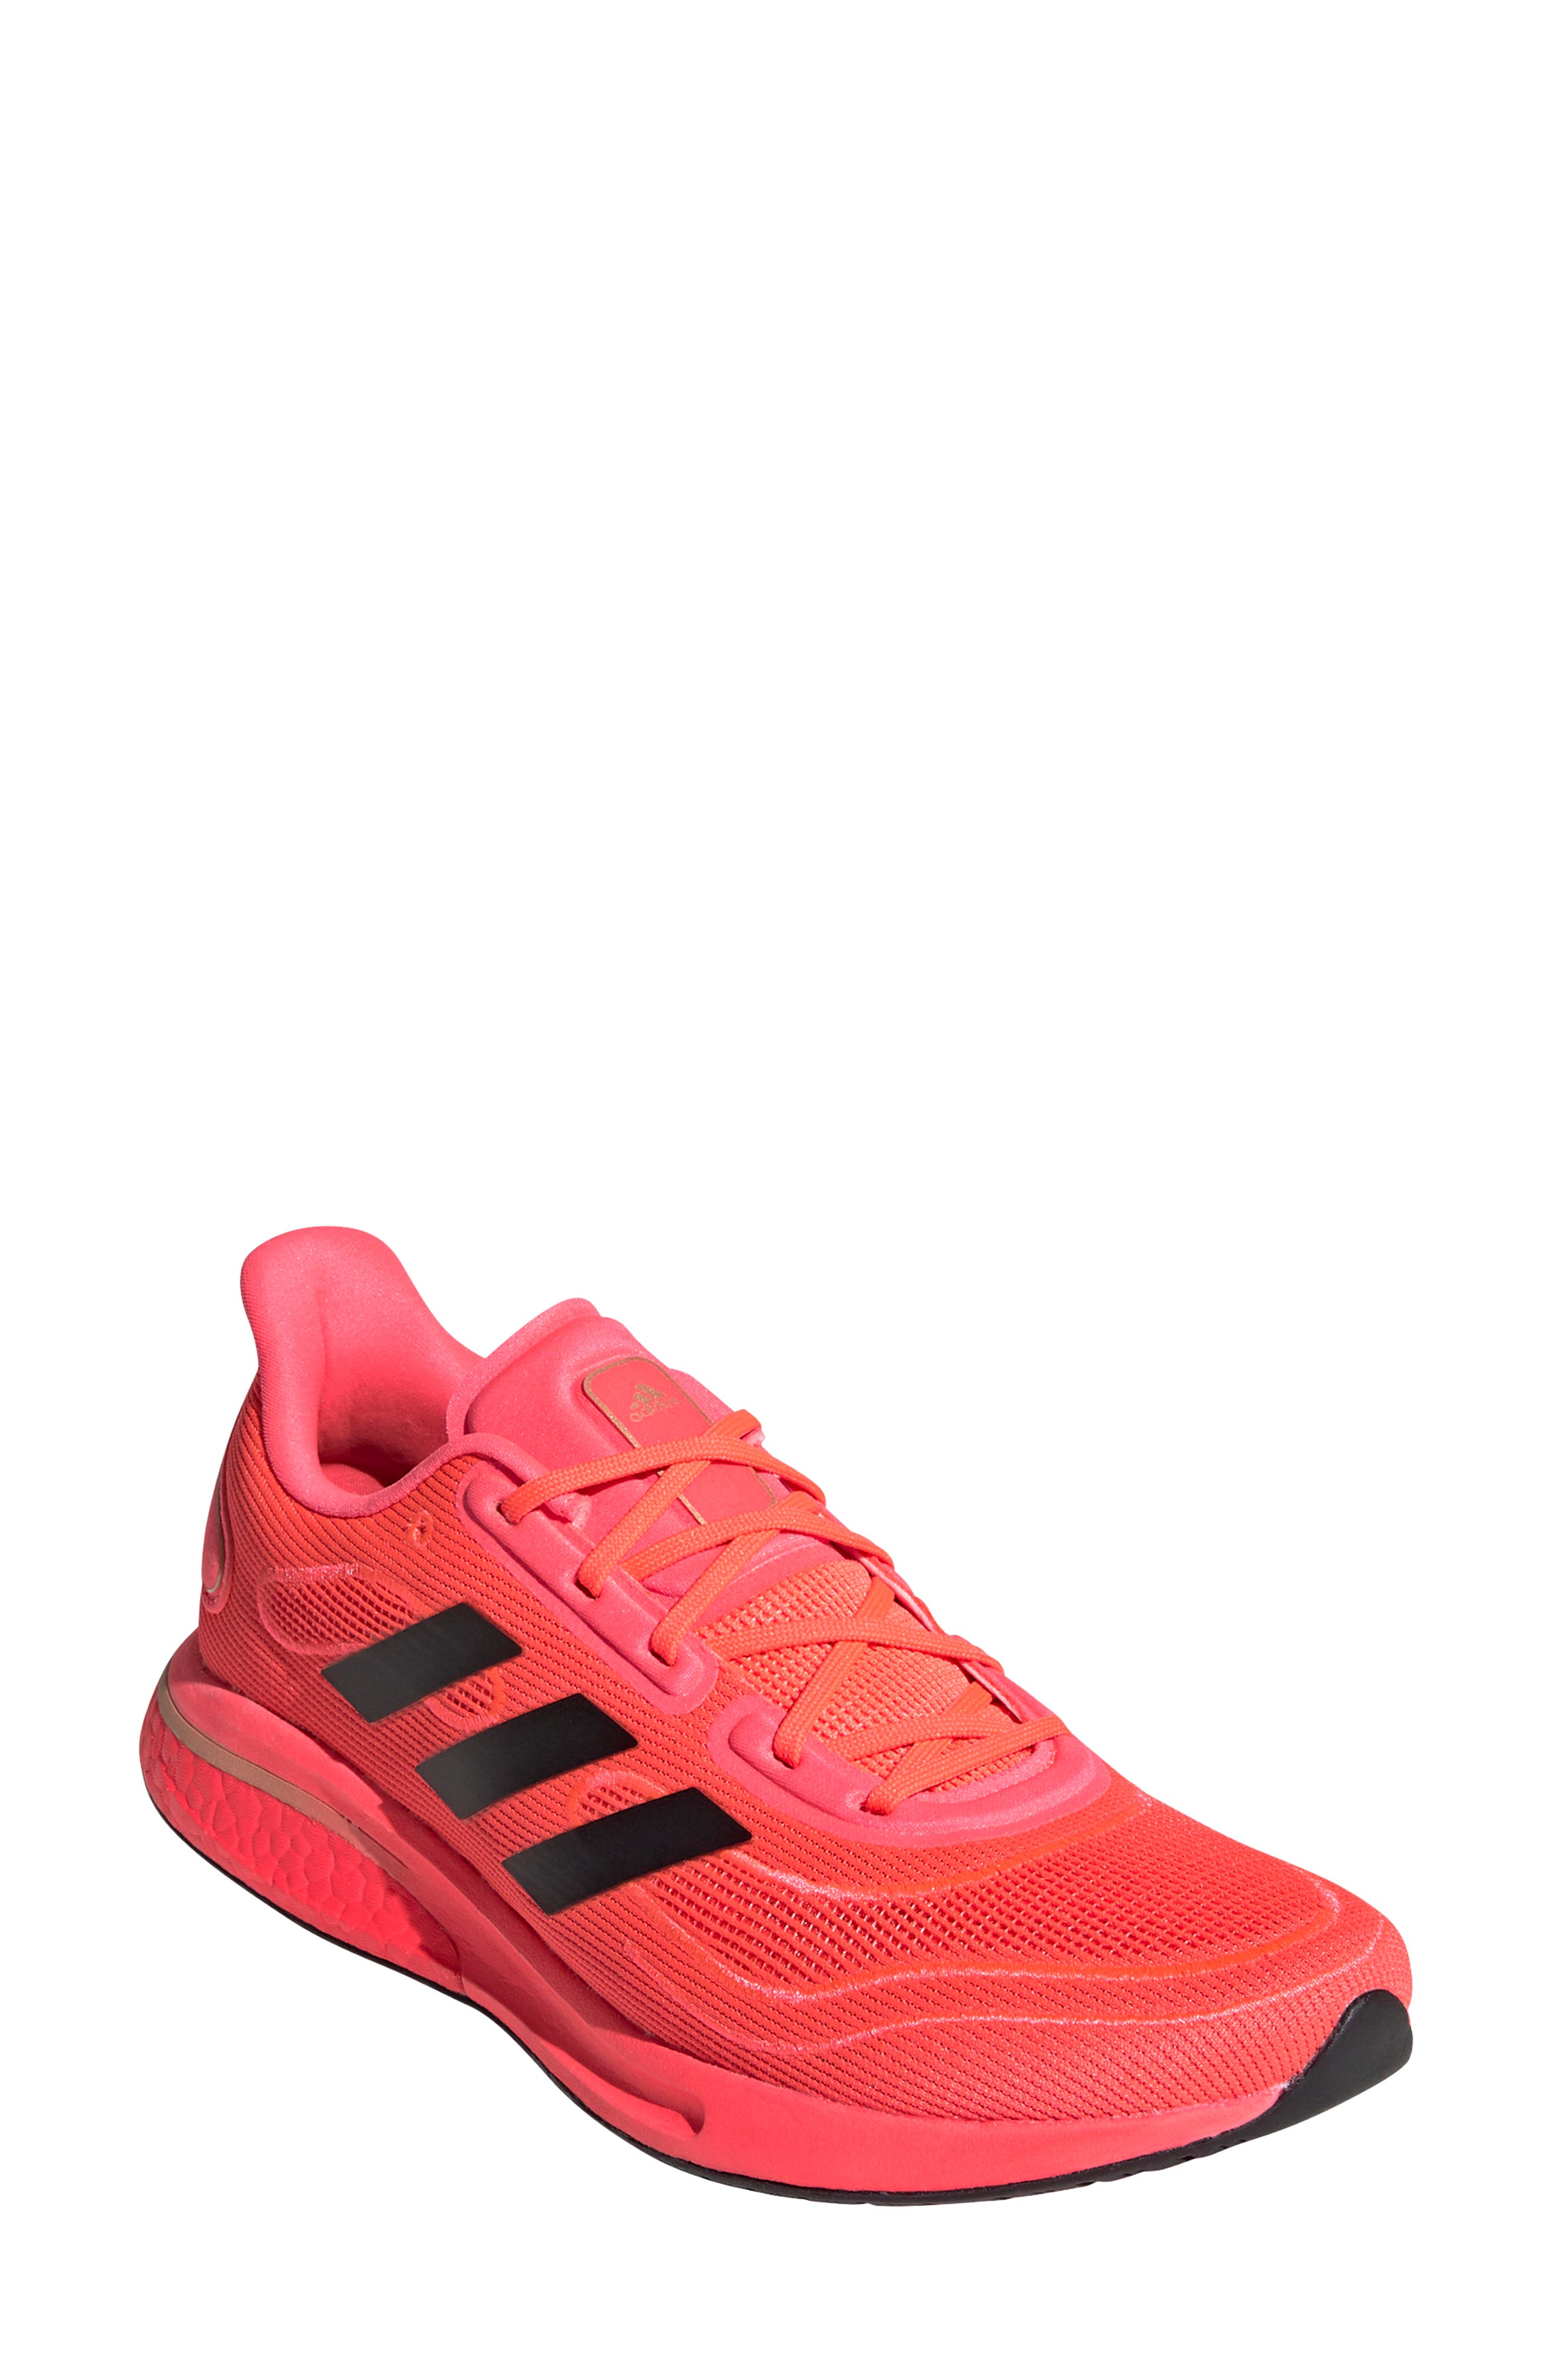 mens pink athletic shoes